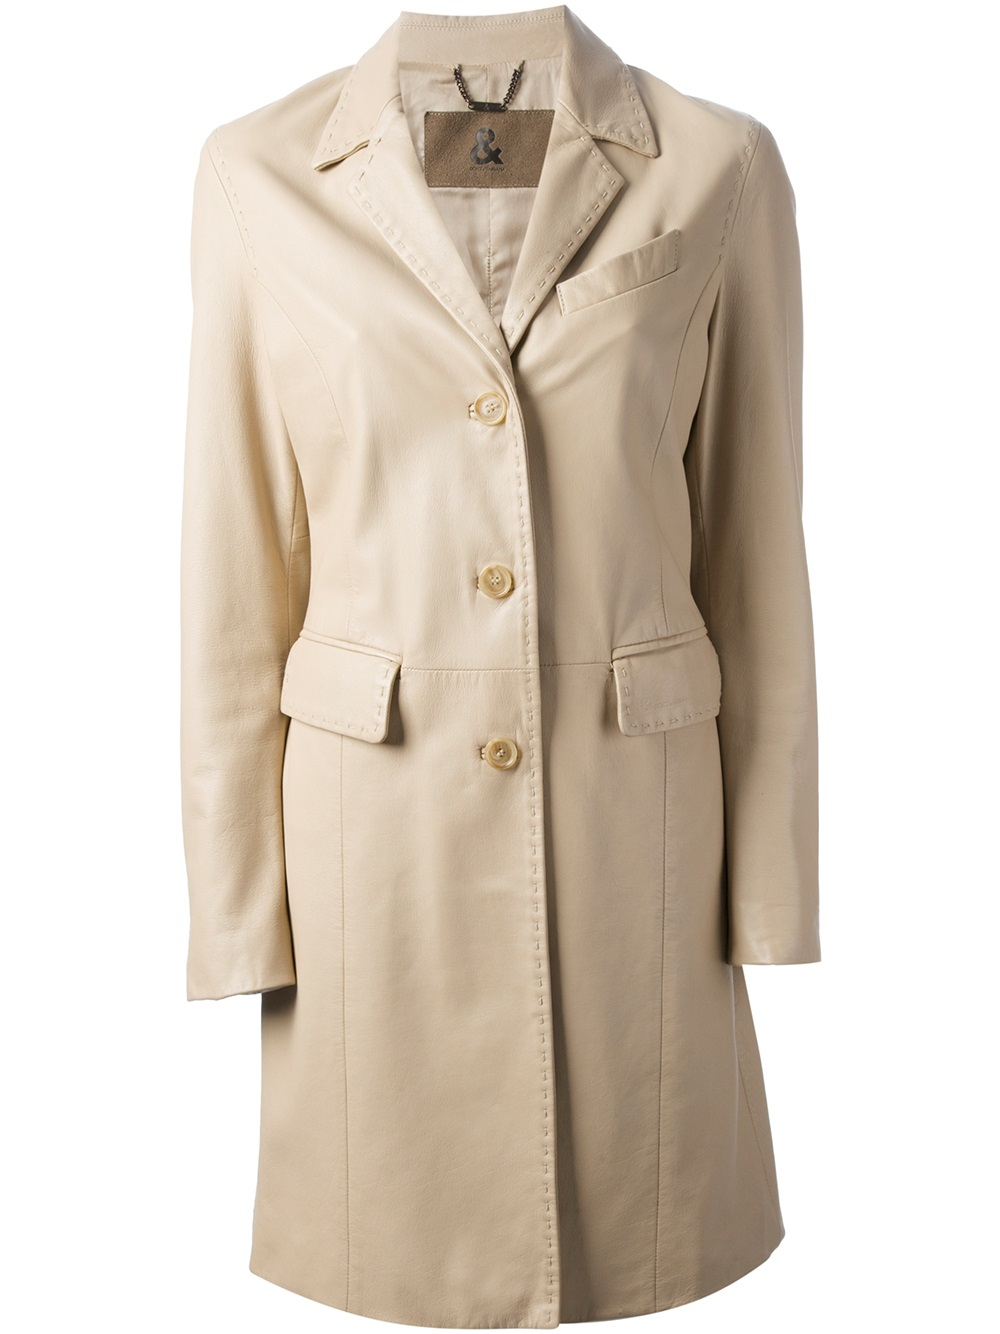 Dolce & gabbana Classic Trench Coat in Natural | Lyst